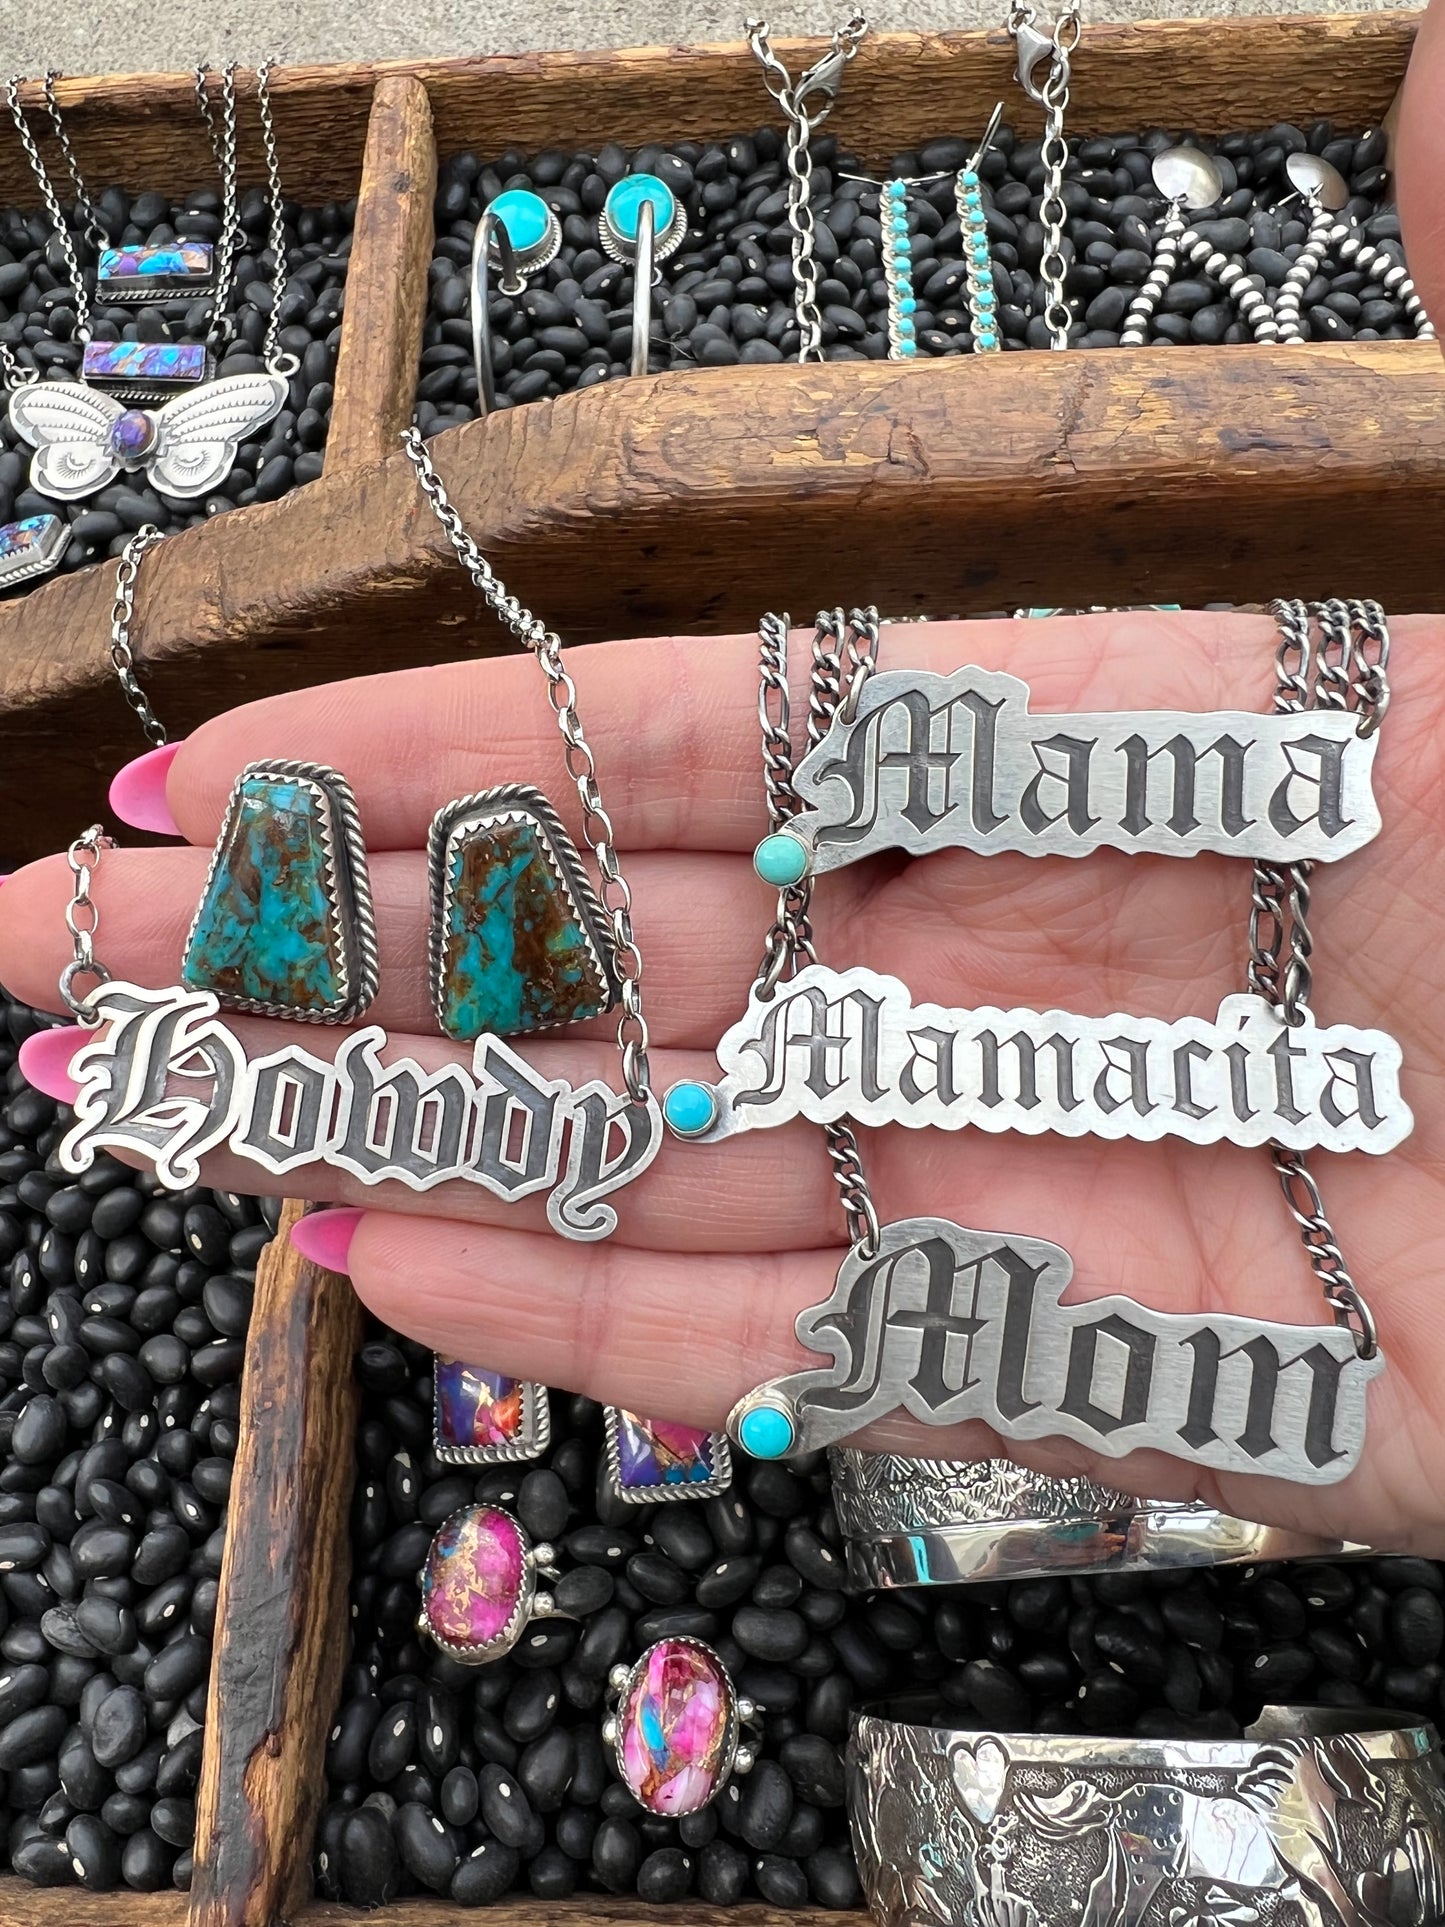 MAMACITA necklace nameplate 18” sterling silver